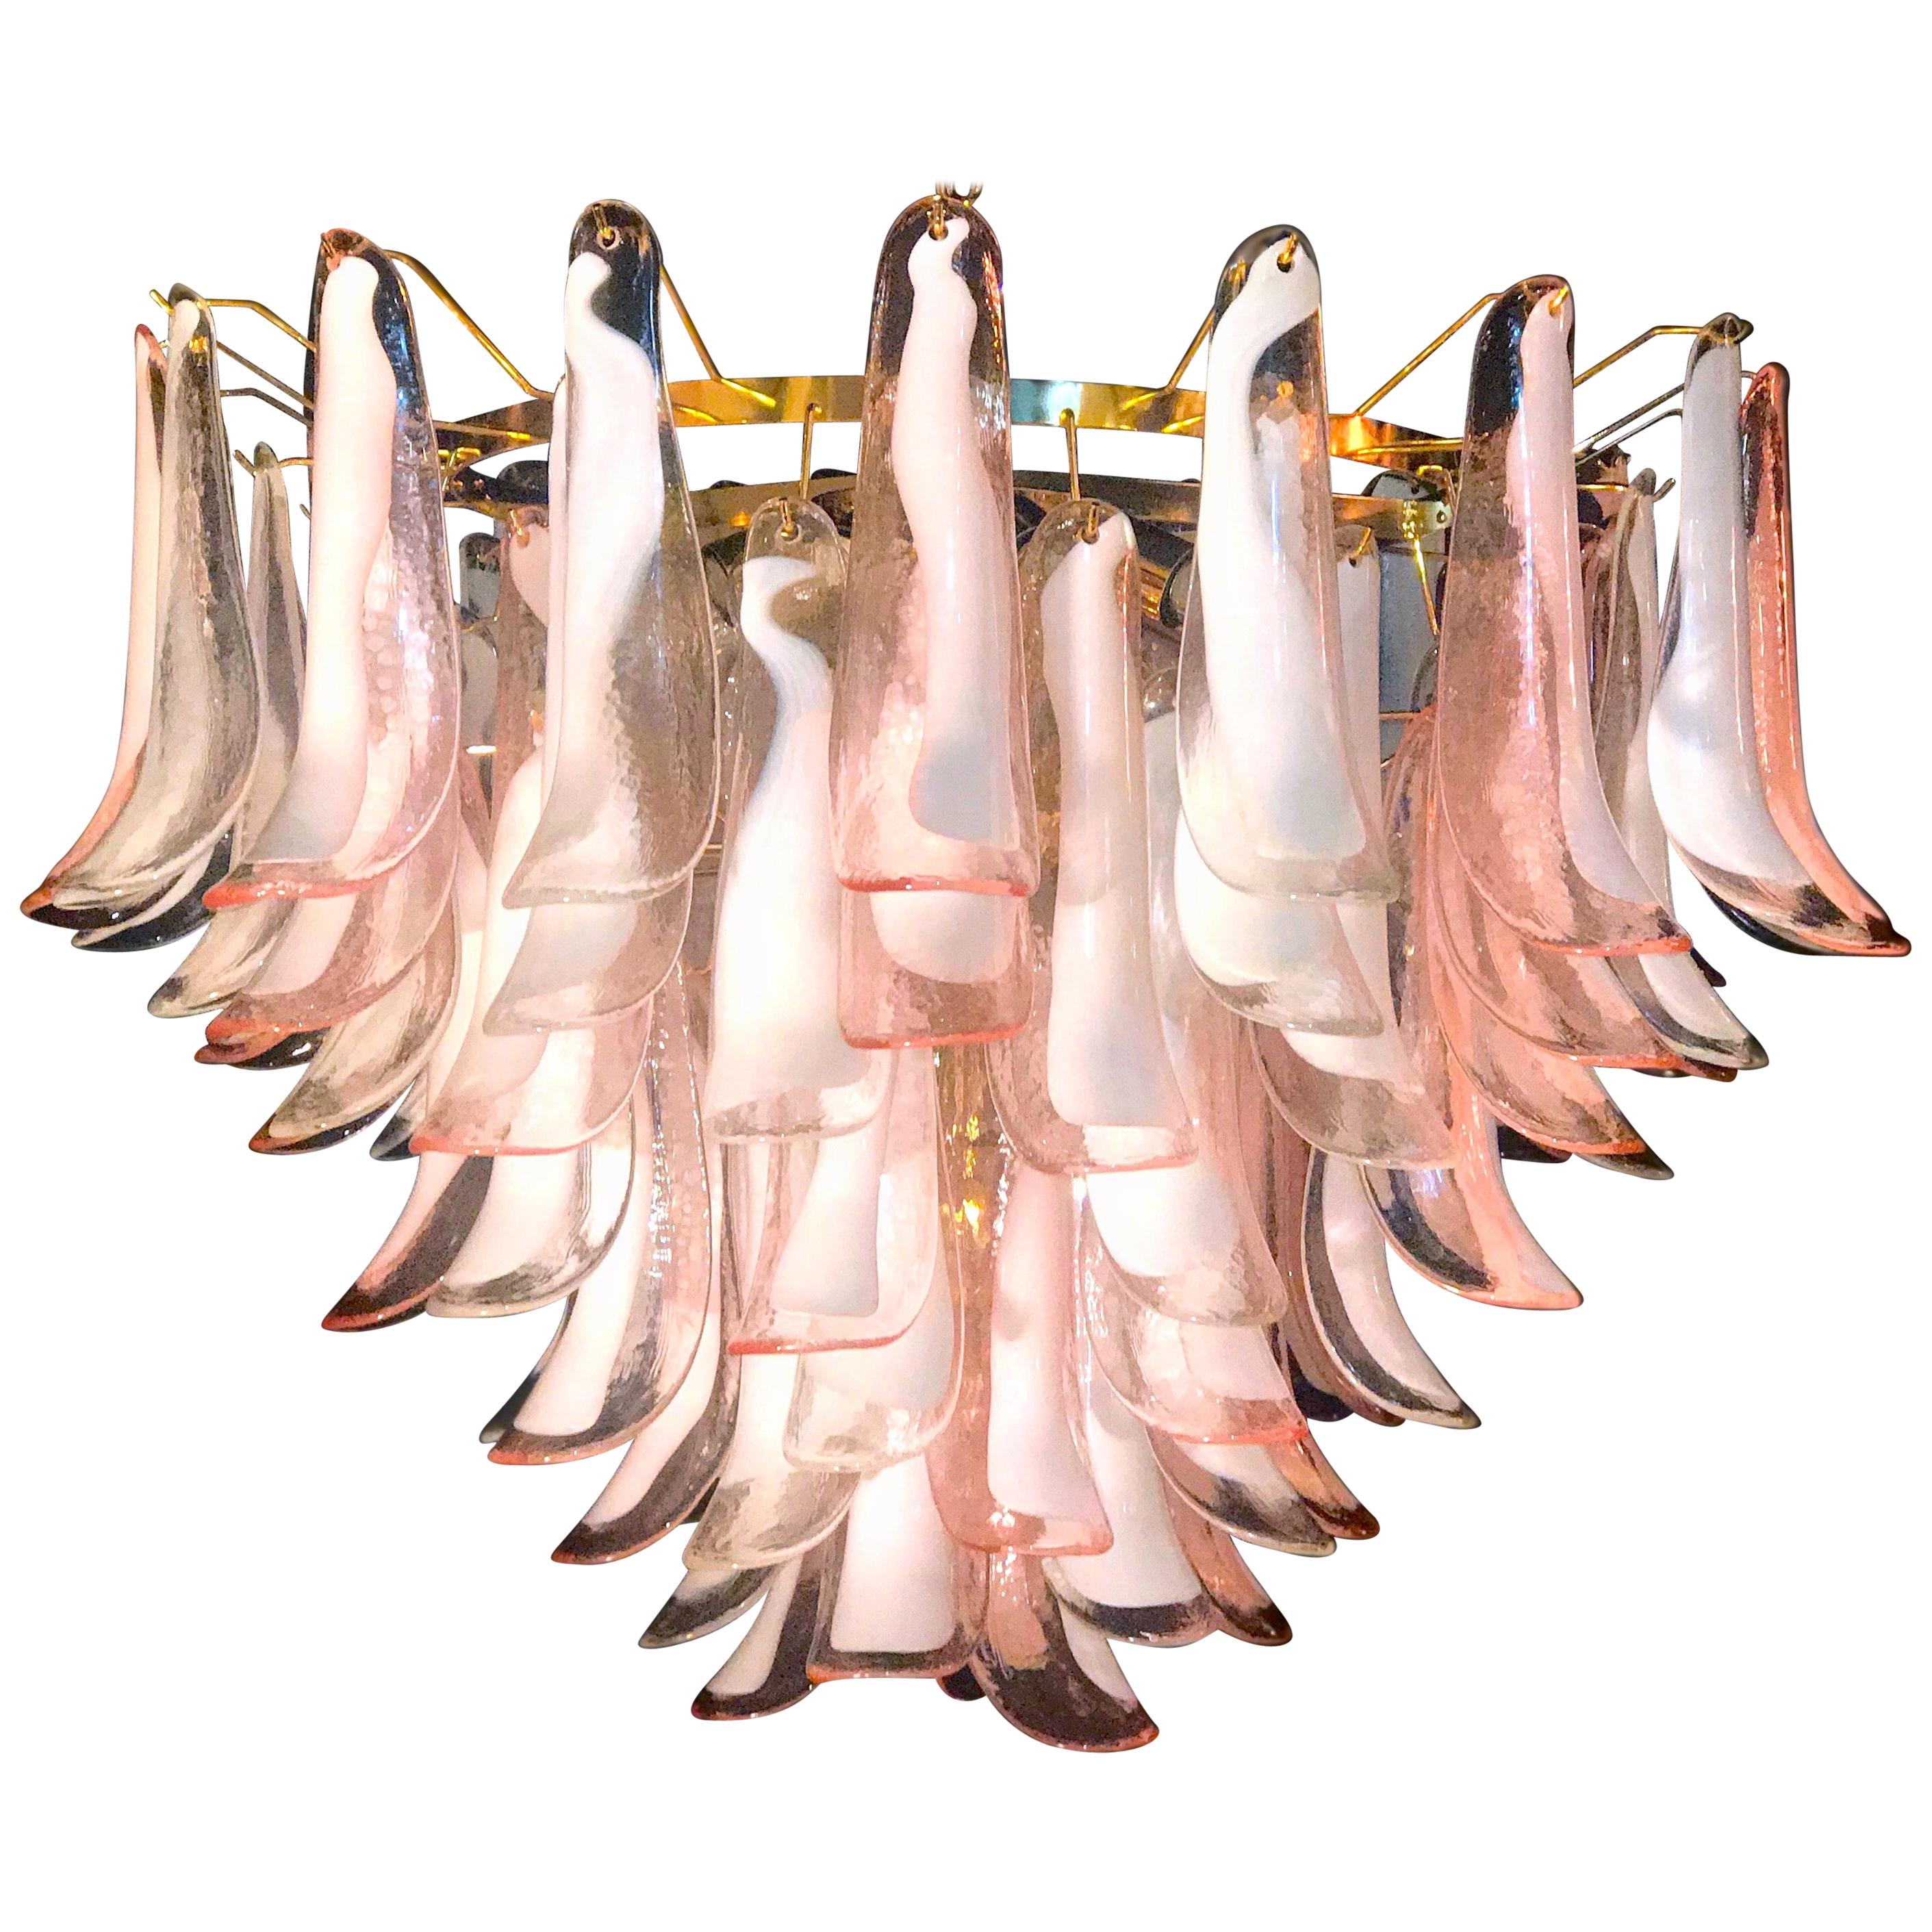 Fabulous Italian chandelier made by 90 pink and white lattimo Murano glass petals supported by a brass frame by Galleria Veneziani.
We can customize the frame, brass or chrome. 
Price is for one item. 

Dimensions: 51.20 inches (130 cm) height with